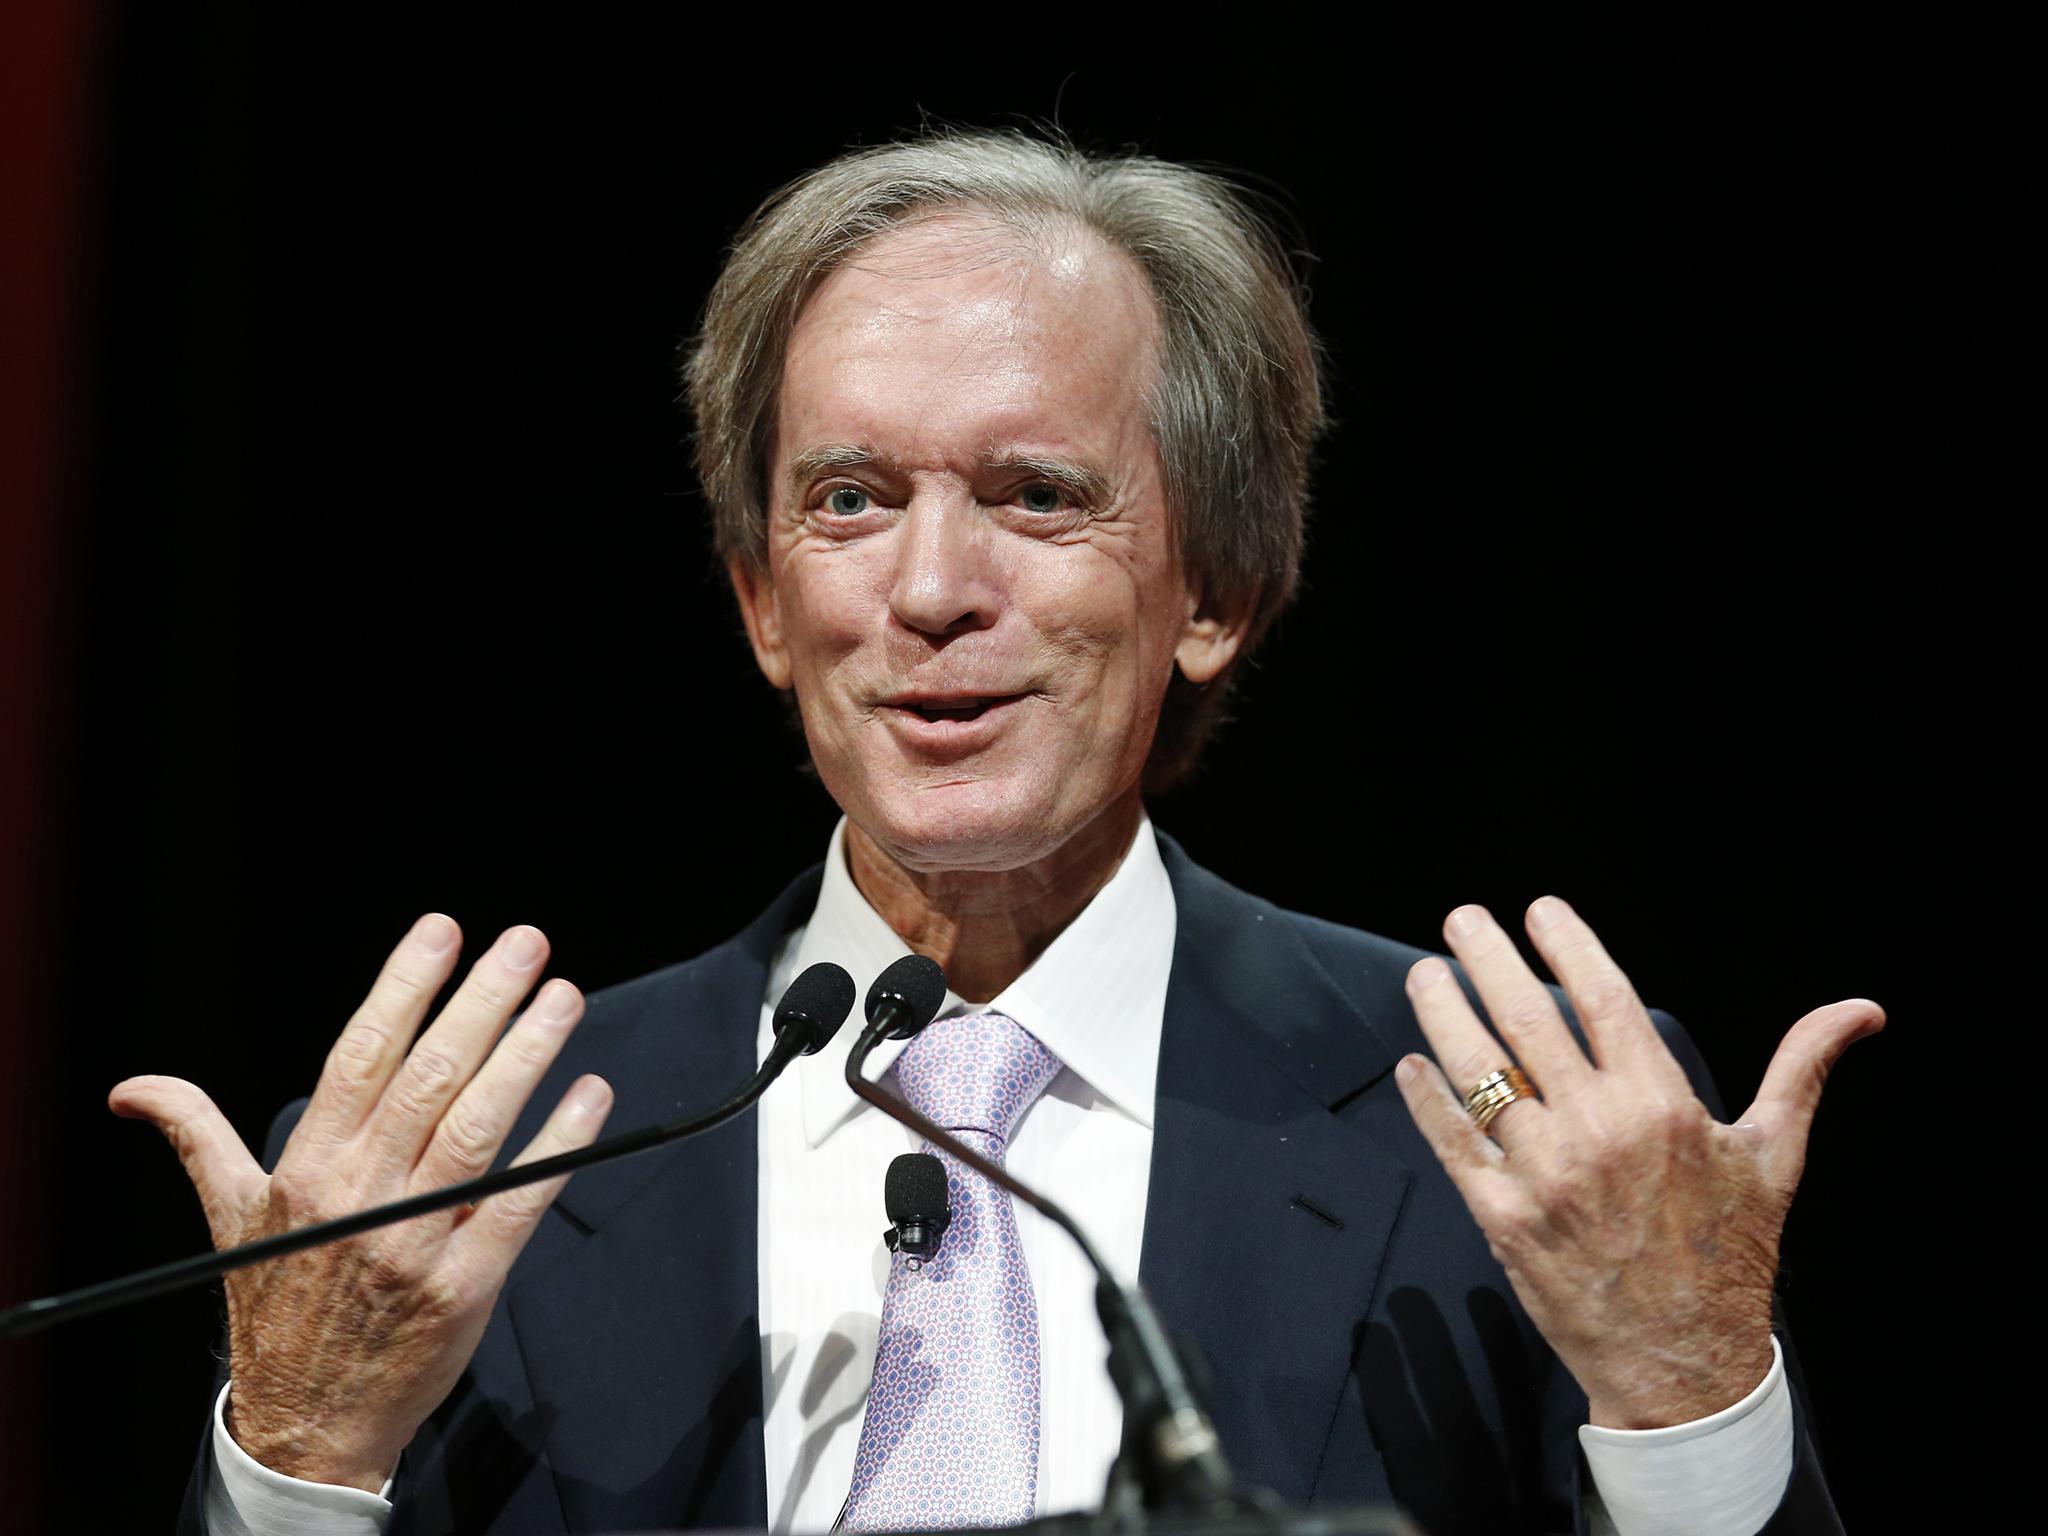 Bill Gross has the opportunity to demonstrate he still retains some old magic after being handed $500m to manage by George Soros